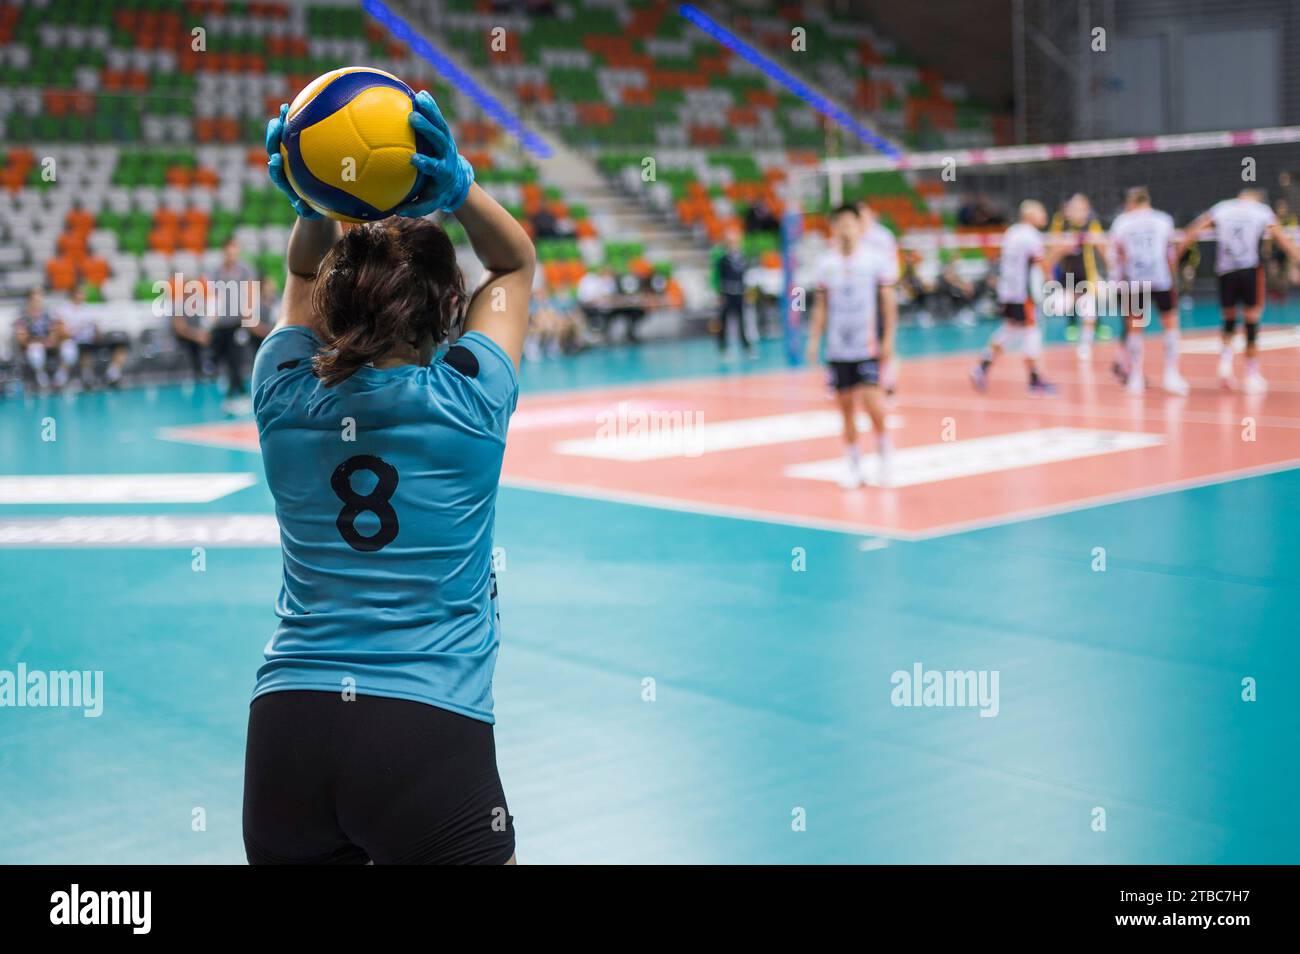 Girl with disposable gloves passing ball during volleyball match. Stock Photo